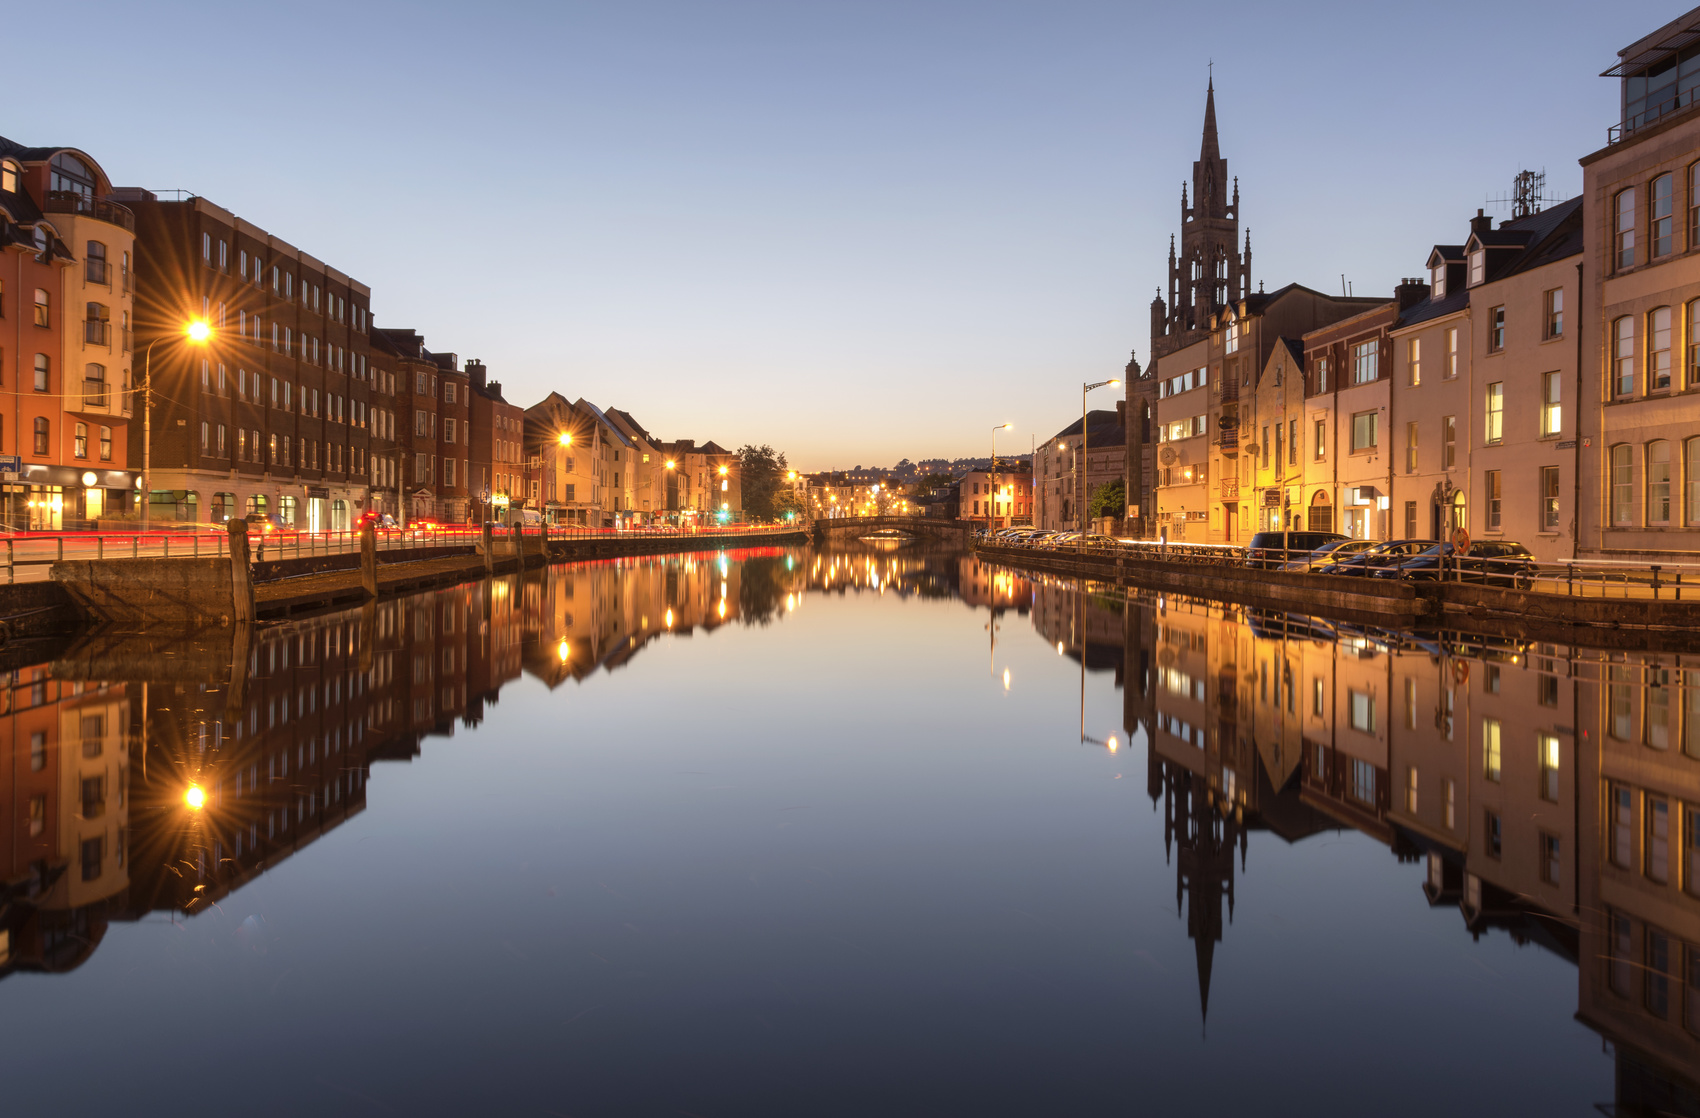 Cork is one of the cities that will explore common smart city challenges